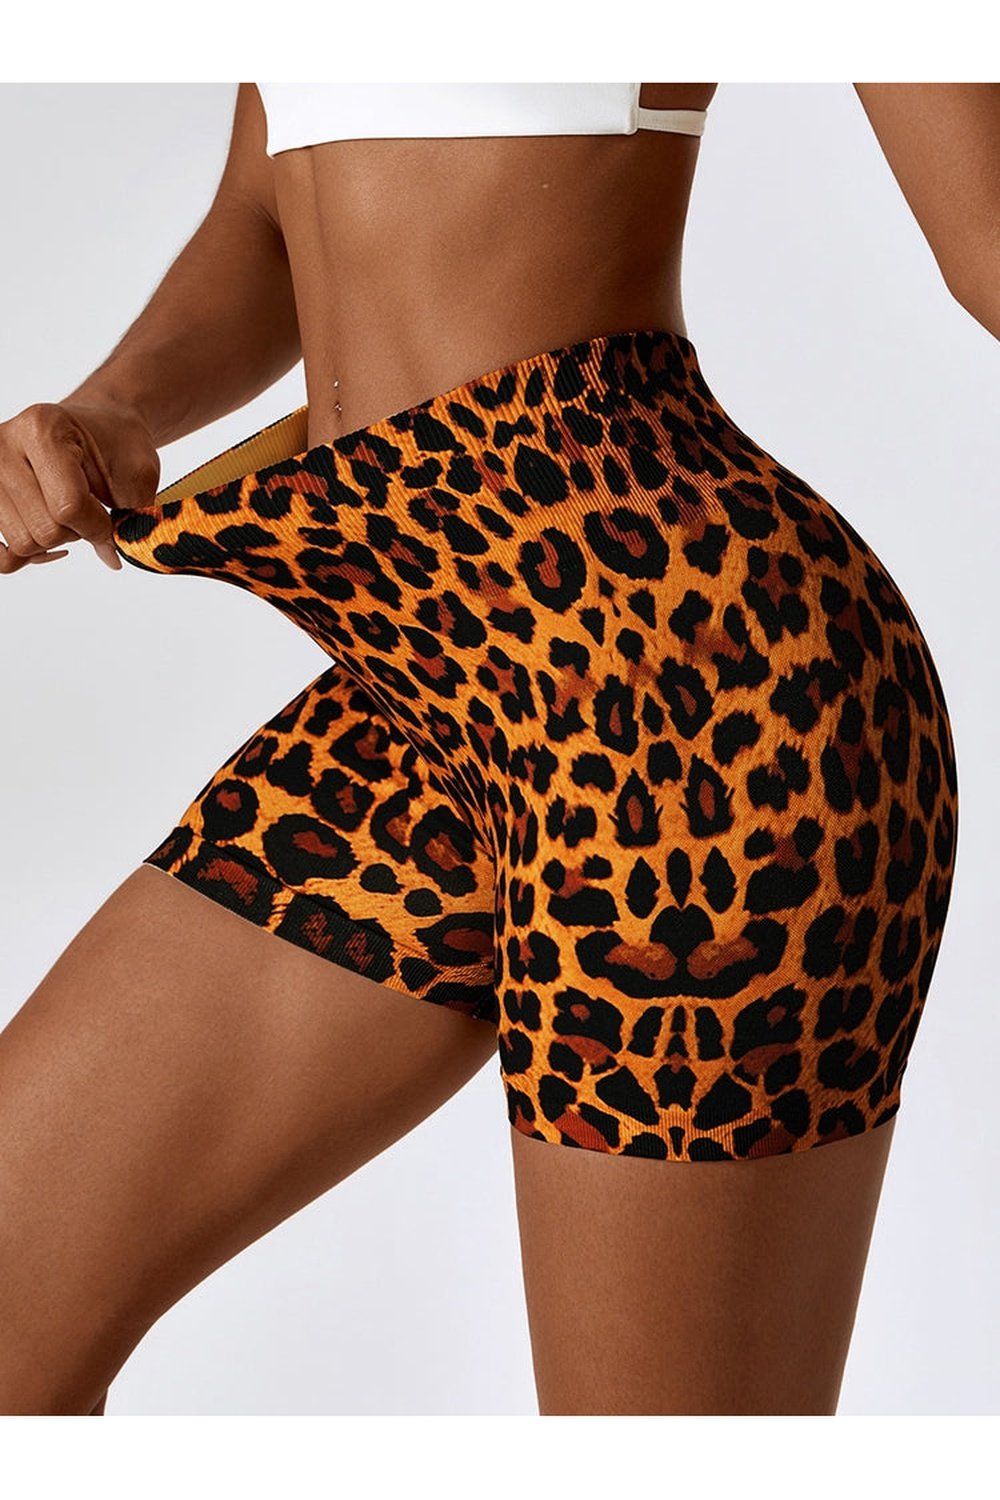 Leopard Print Wide Waistband Sports Shorts - Short Leggings - FITGGINS